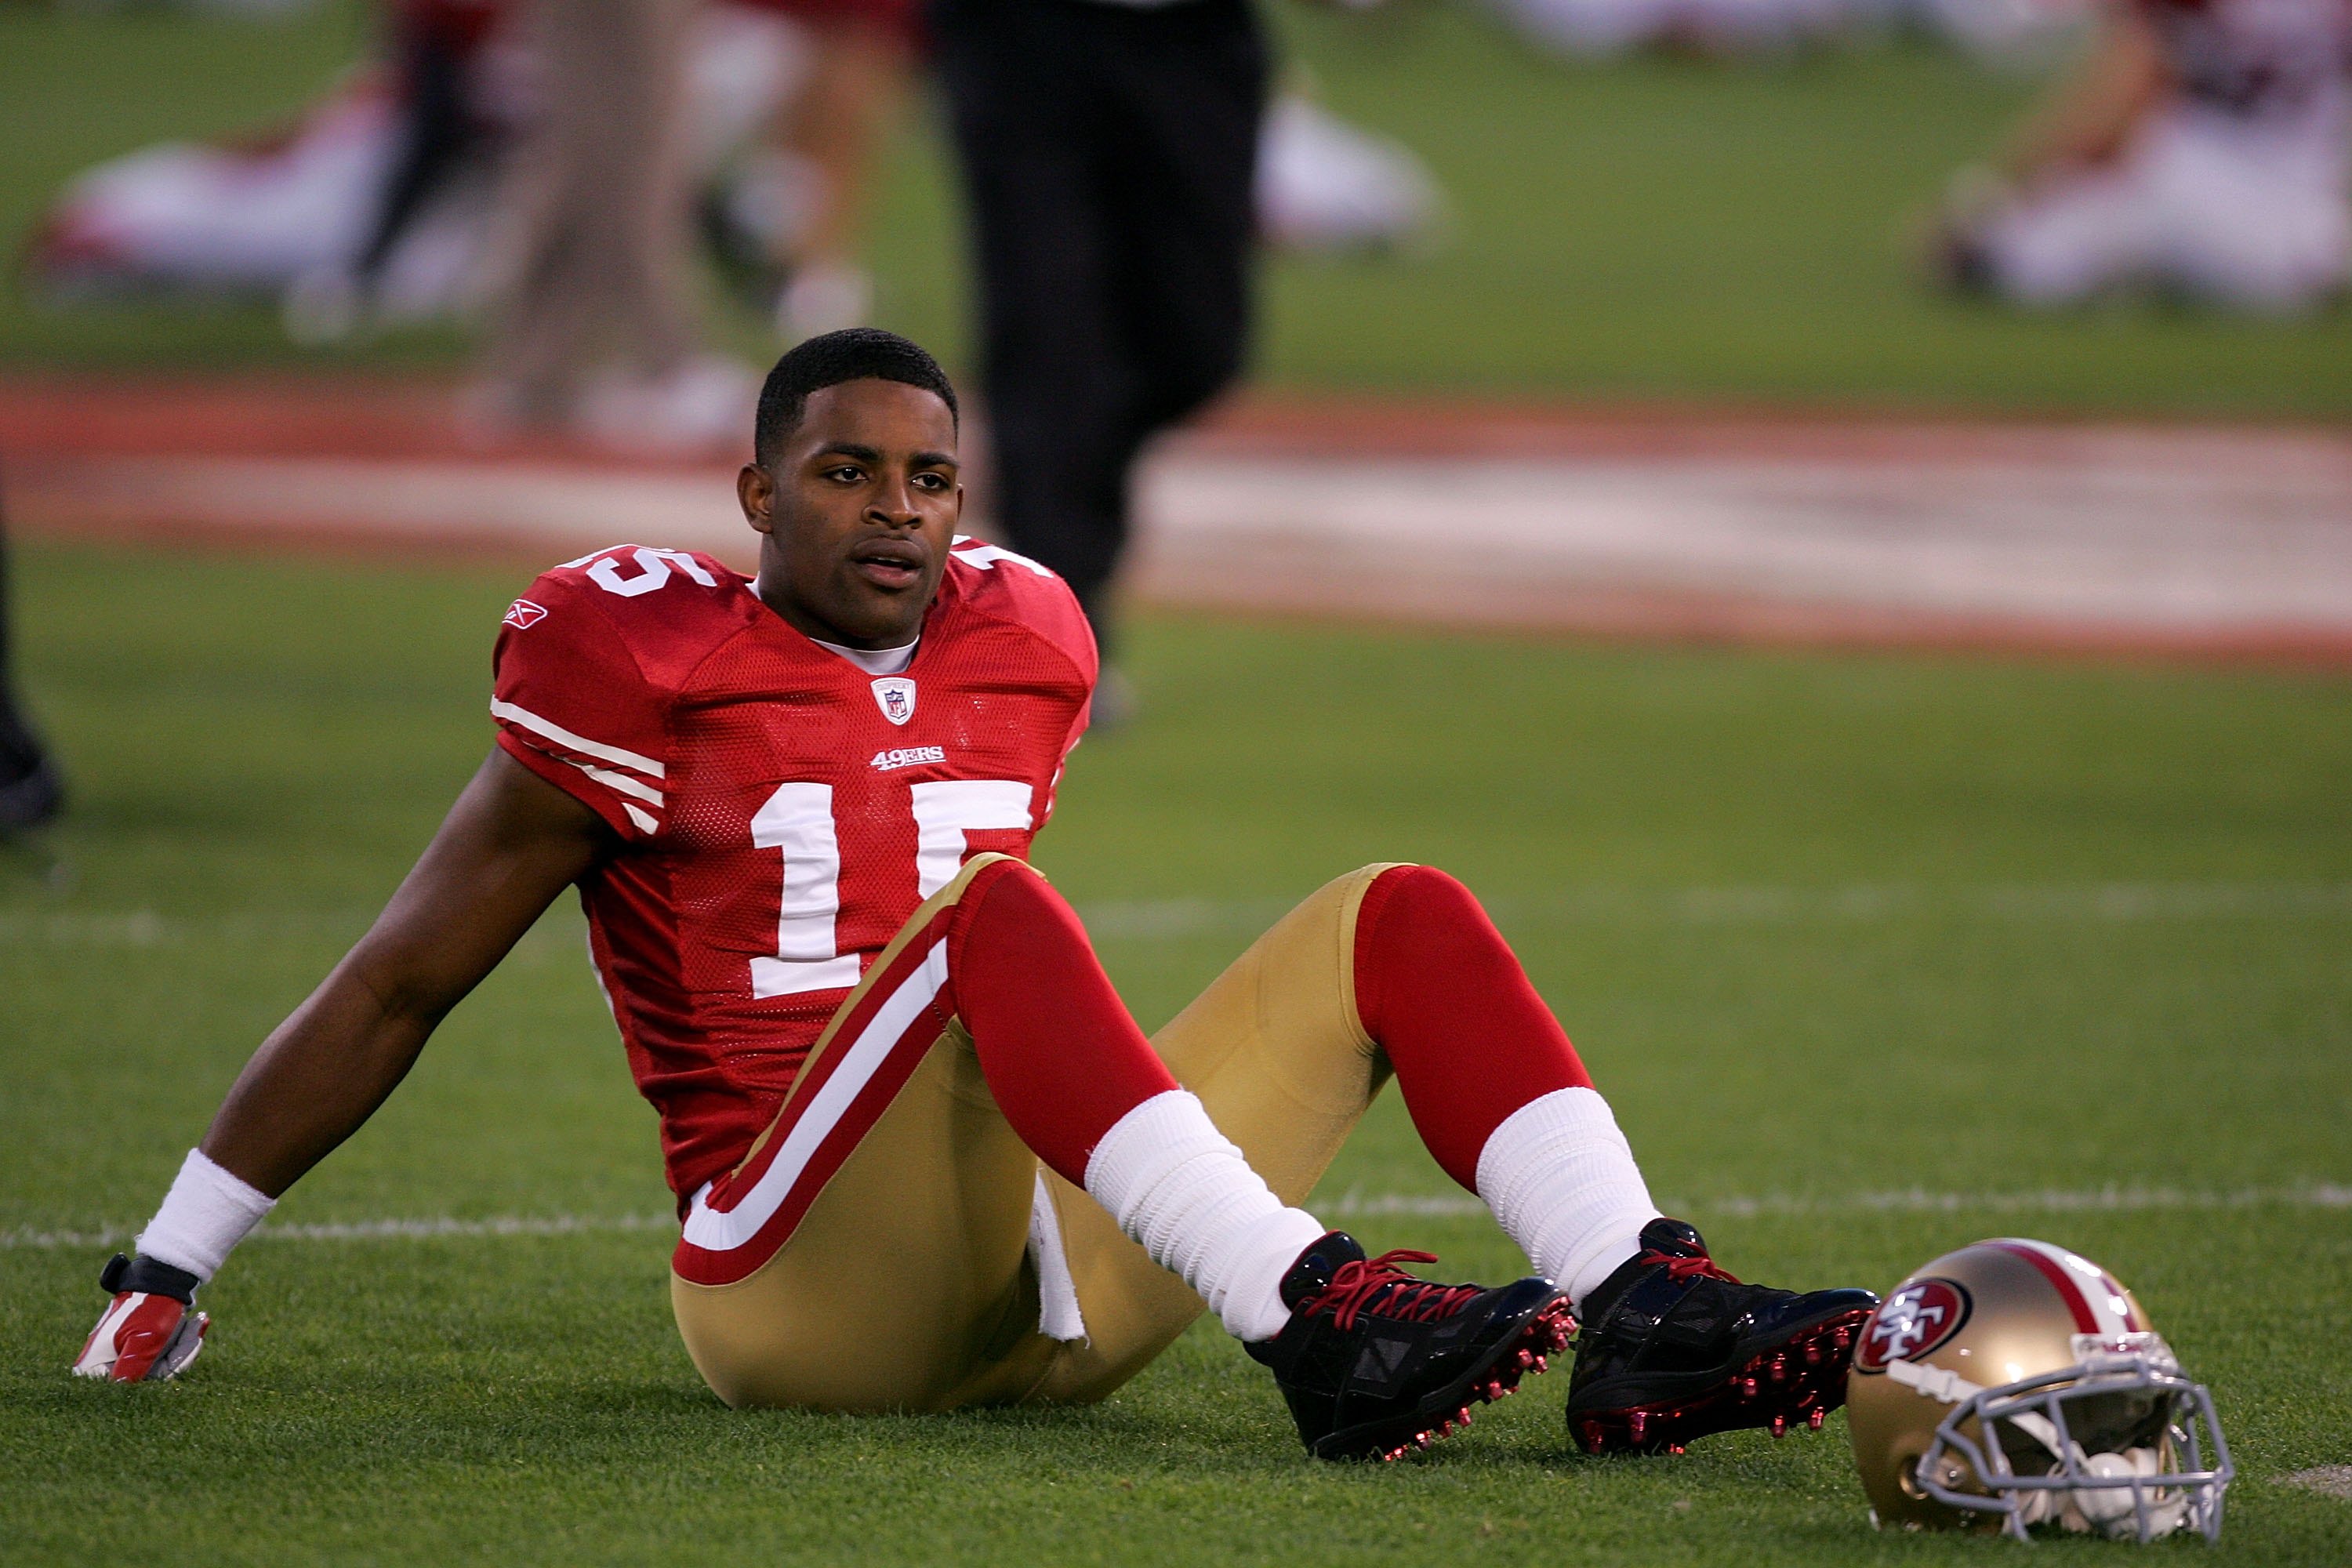 SAN FRANCISCO - DECEMBER 14:  Michael Crabtree #15 of the San Francisco 49ers stands on the field prior to their game against the Arizona Cardinals at Candlestick Park on December 14, 2009 in San Francisco, California.  (Photo by Ezra Shaw/Getty Images)